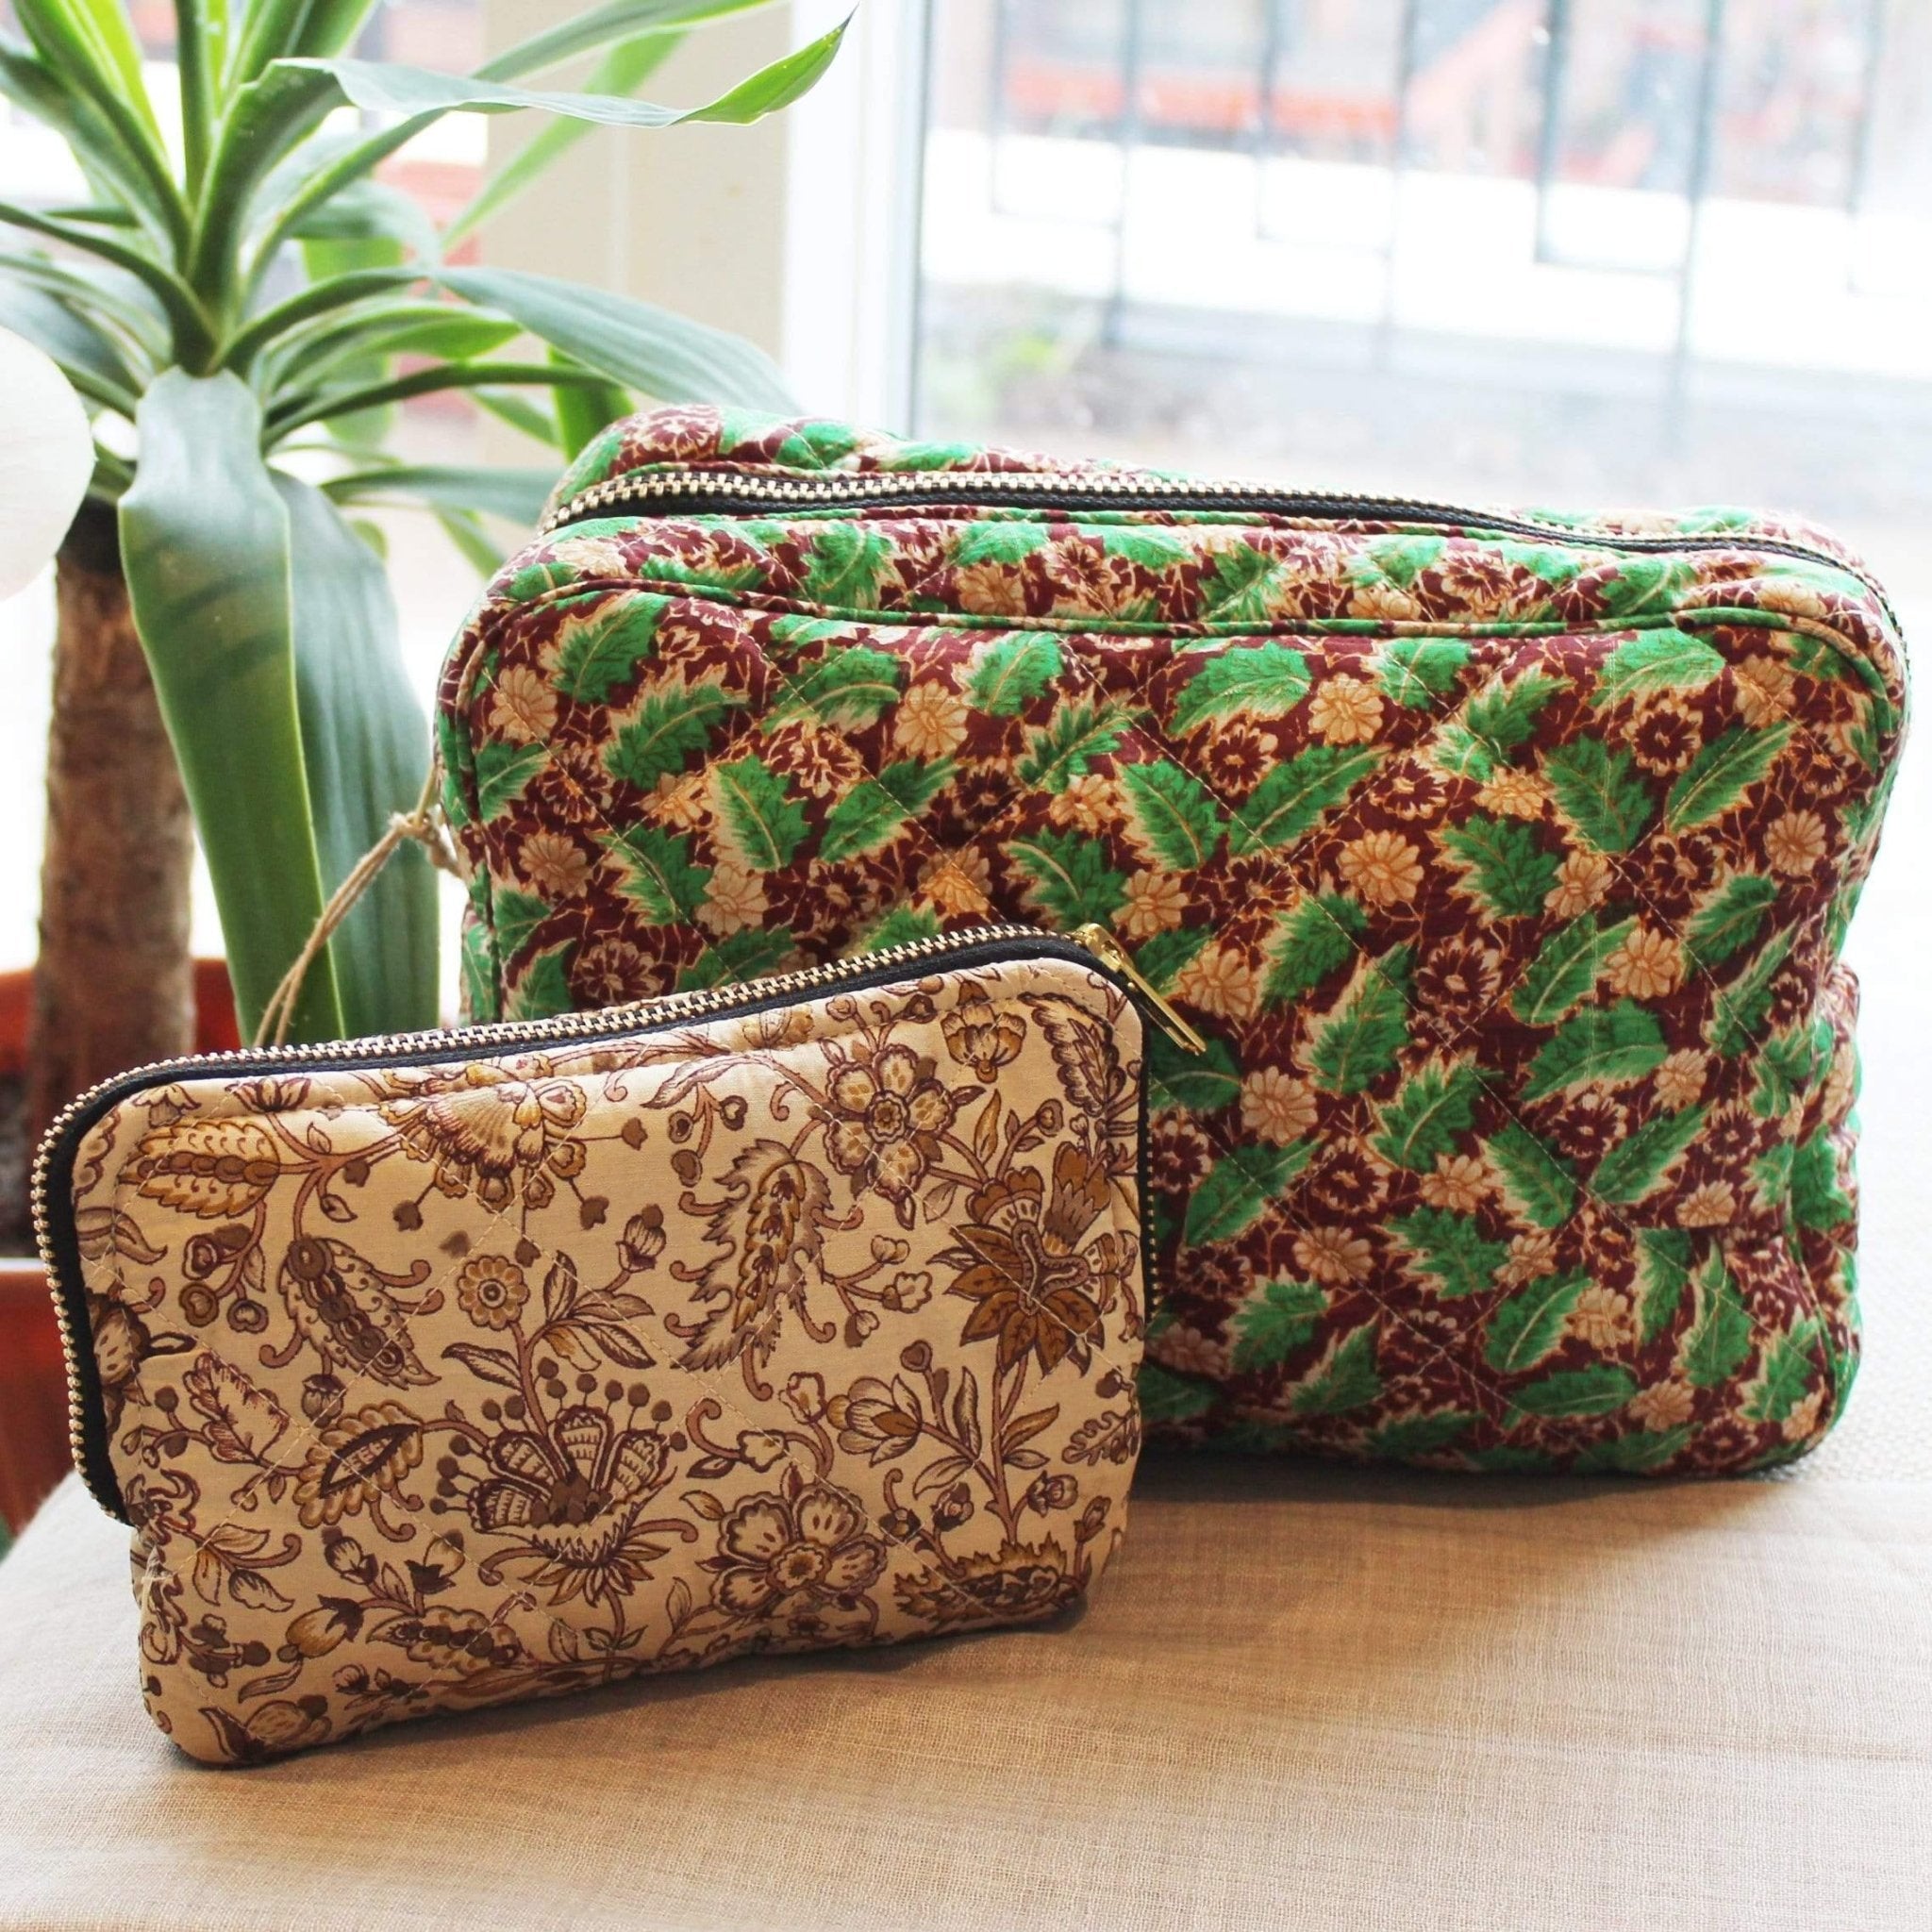 Premium Recycled Silk Make - up Bag + Recycled Silk WashBag (One - Off Print) - Ammpoure Wellbeing